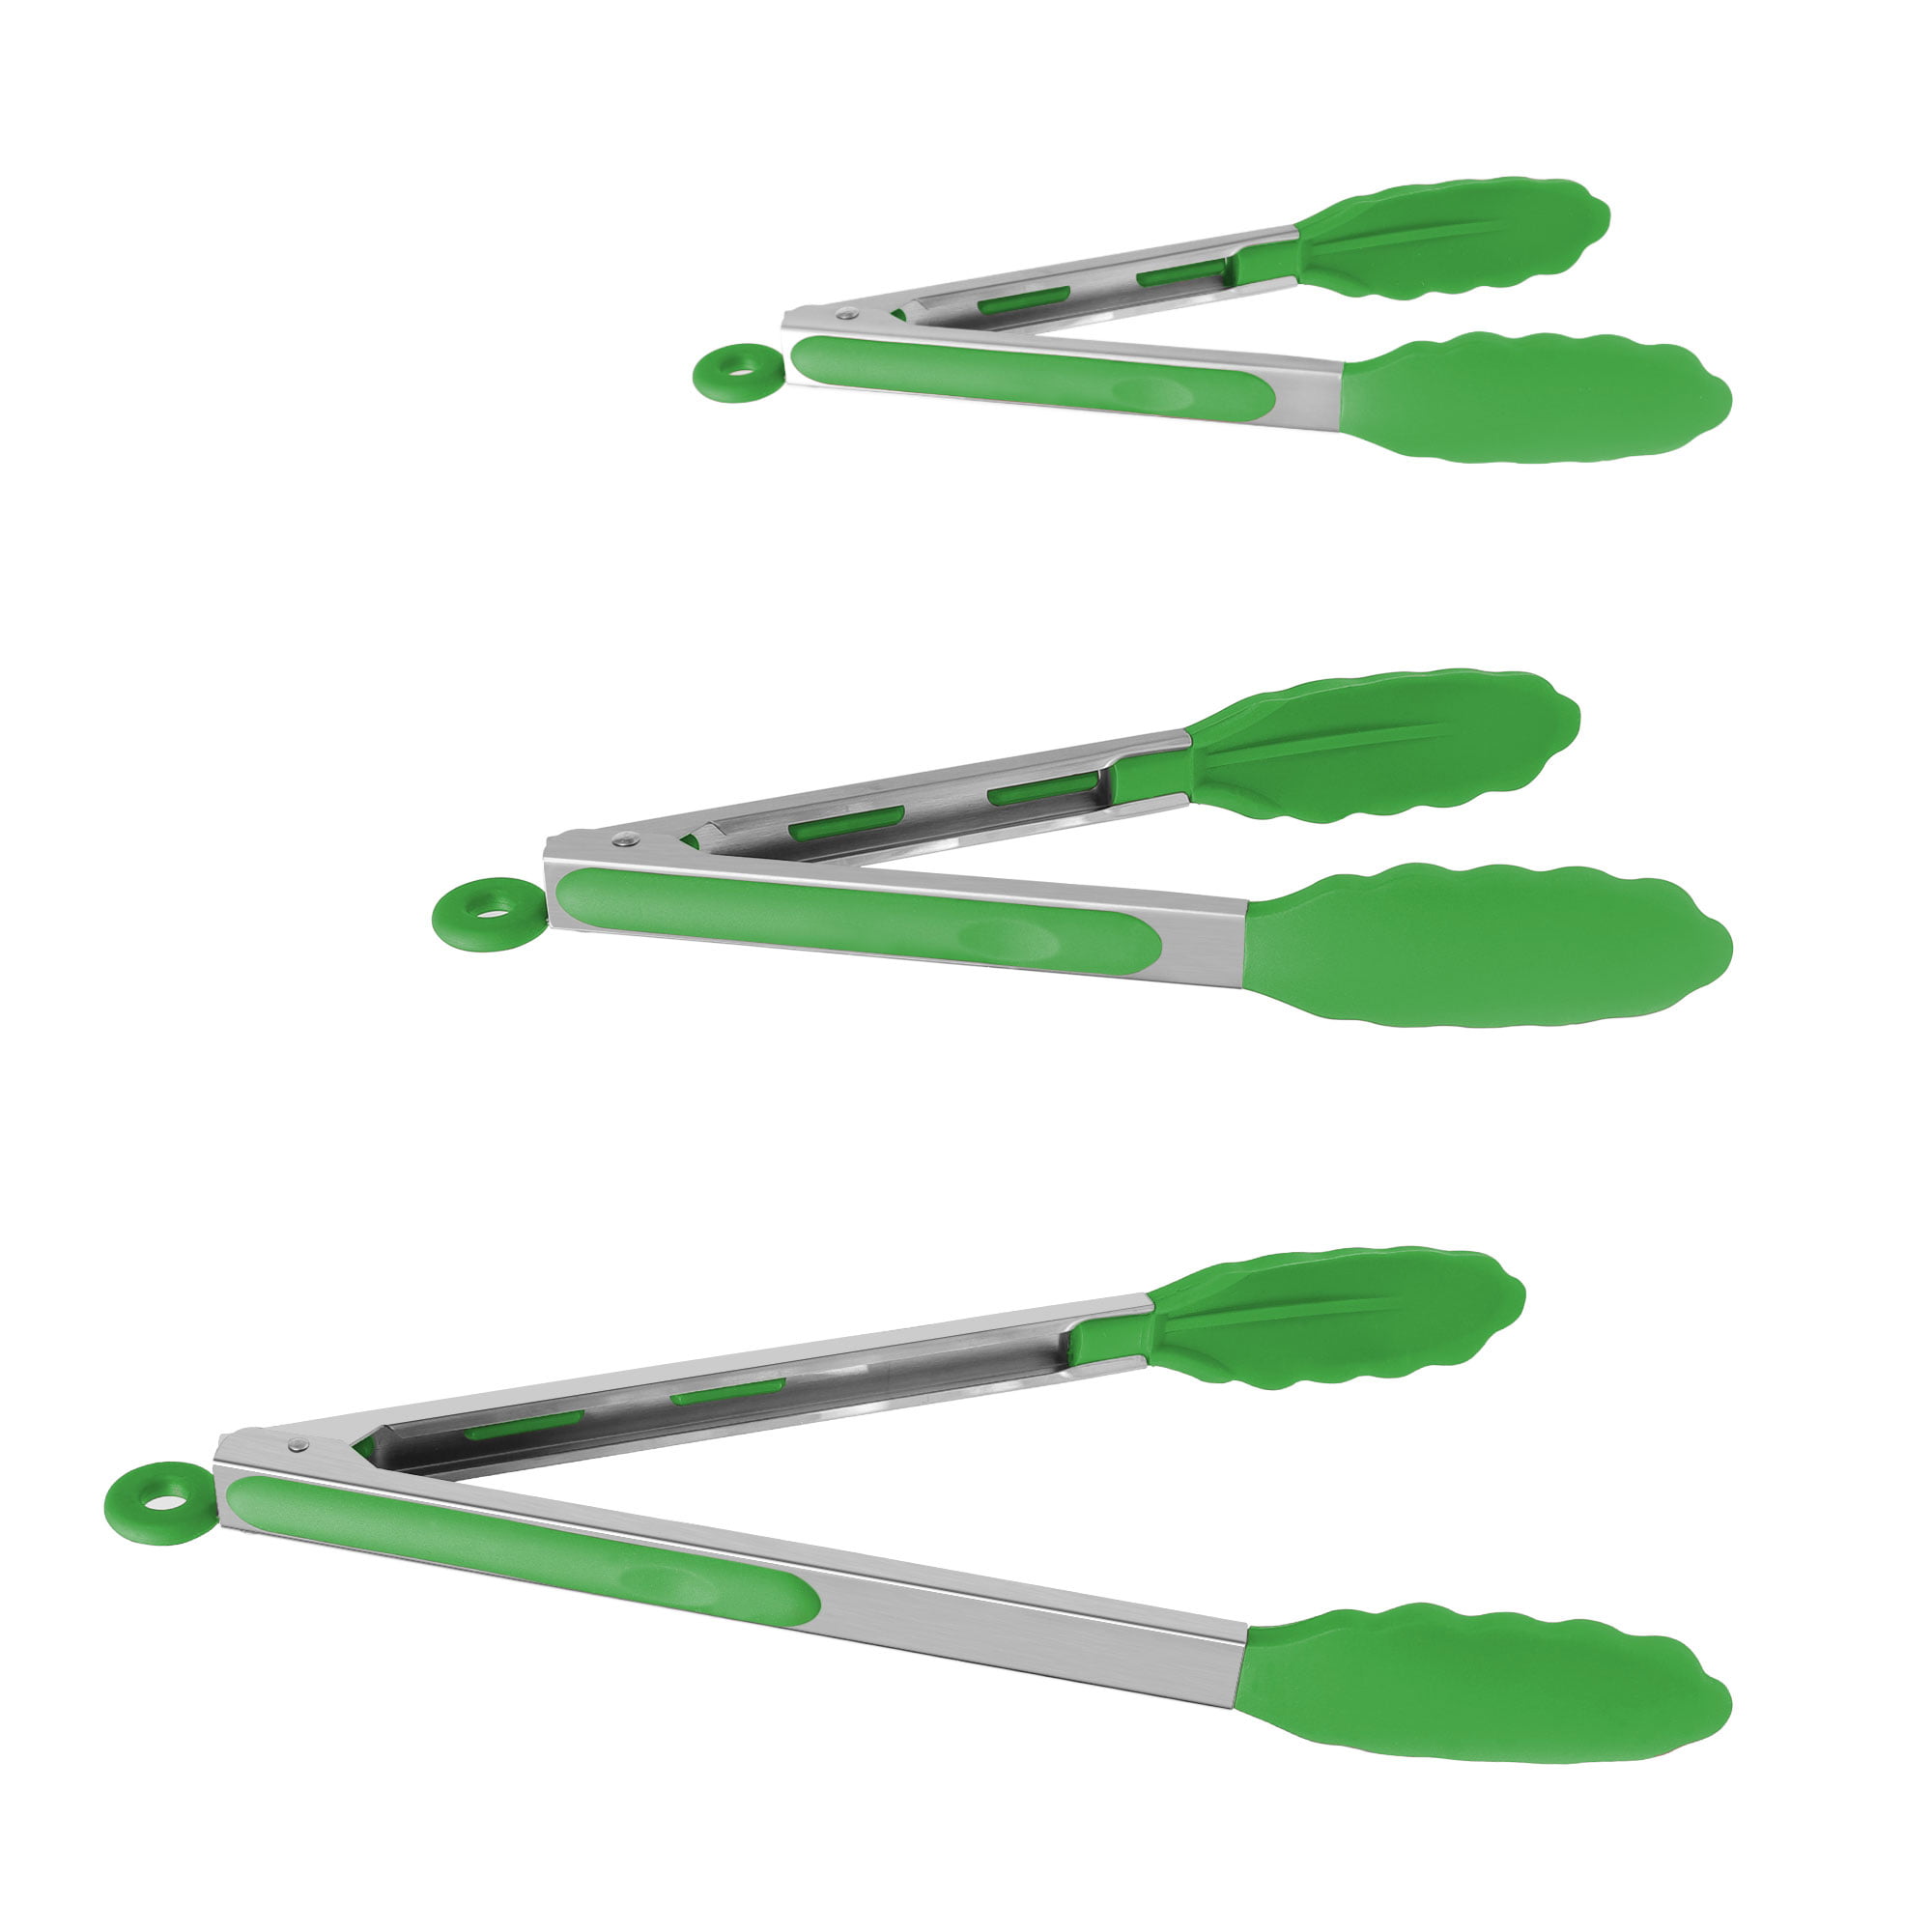 Whisk and Tong Kitchenware Set, Stainless Steel Tongs with Silicone Tips  Wisking Tool Kitchen Accessories for BBQ Cooking Baking Frying (Green)